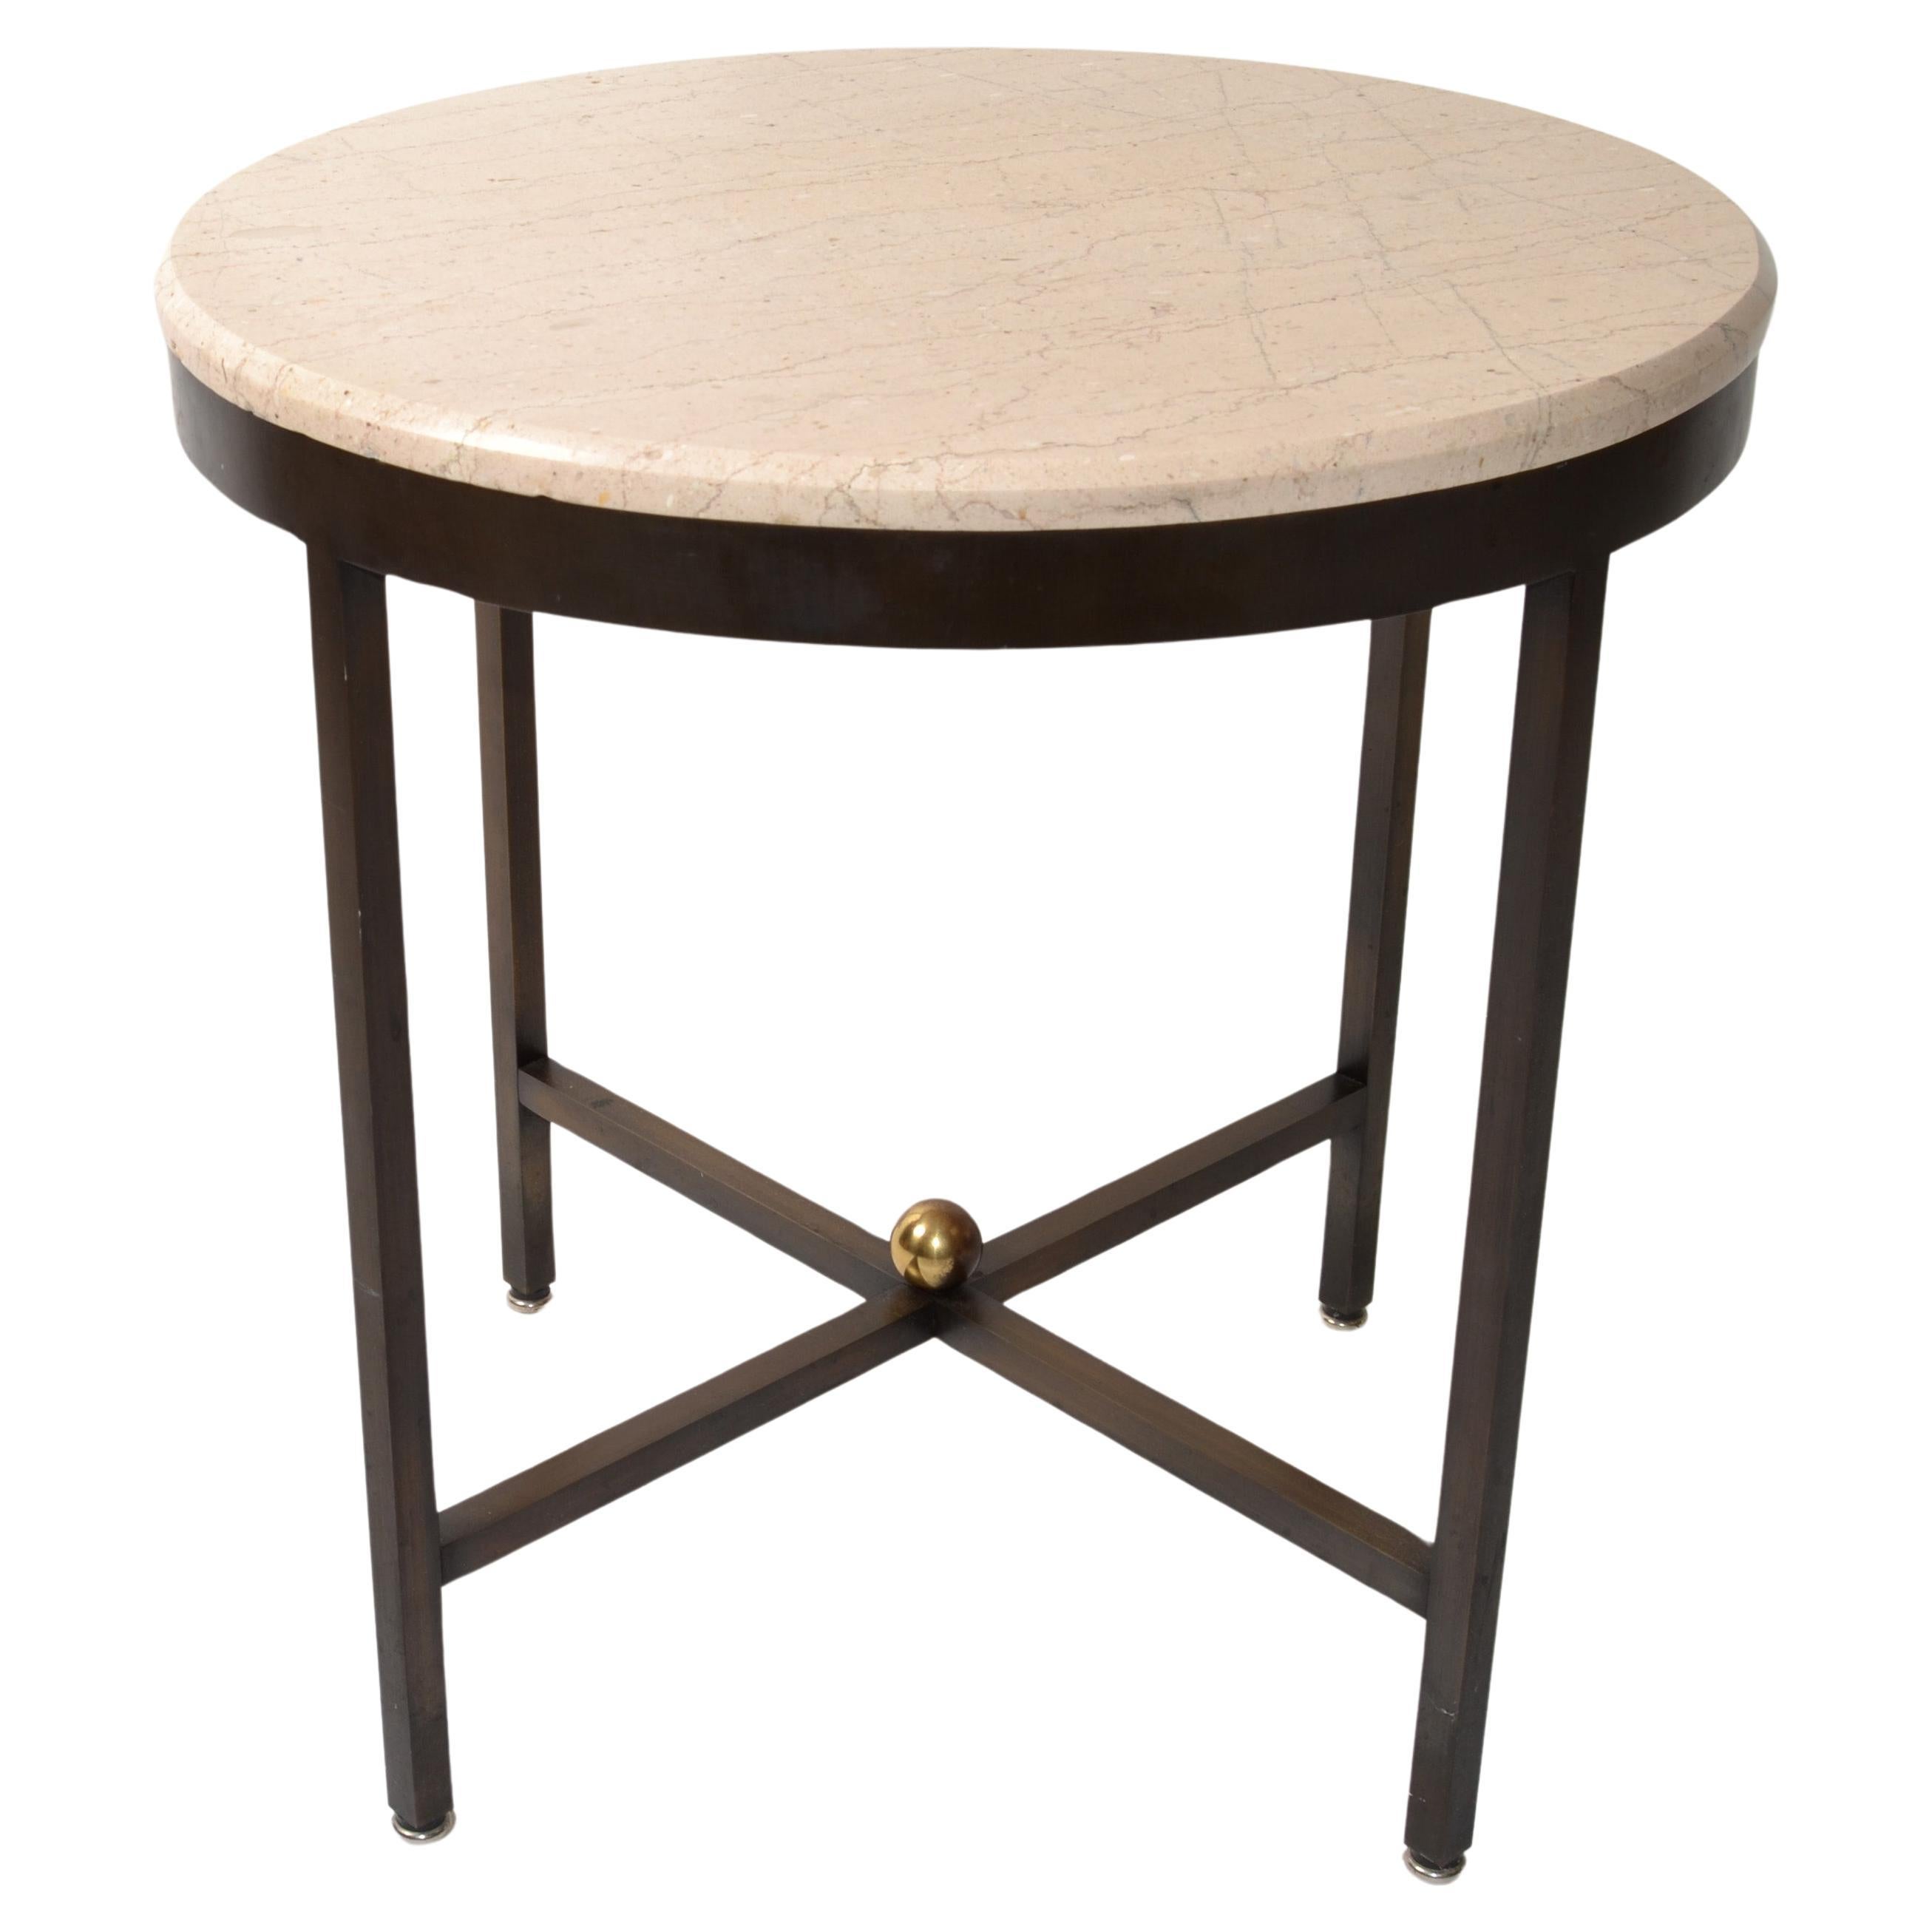 Mid-20th Century Italian Bronze Brass Beveled Round Tan Stone Top Side Table  For Sale